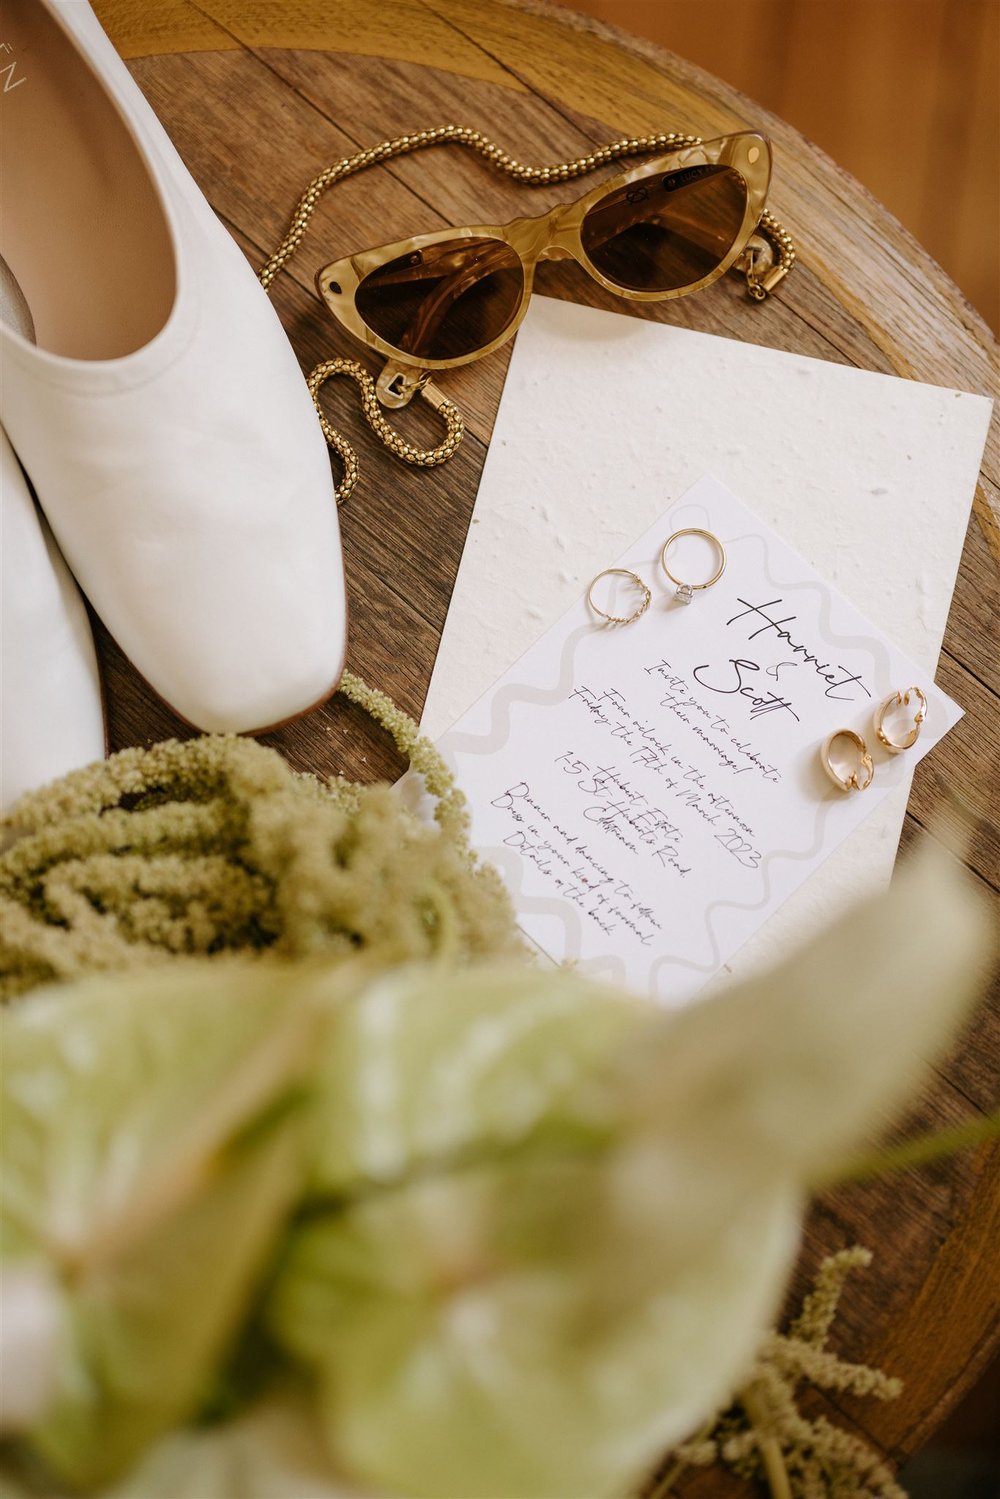  Sartorial style and bride’s details on her wedding day. Essen The Label ballet slippers, Lucy Folk Sunglasses and rings by Sarah and Sebastien 